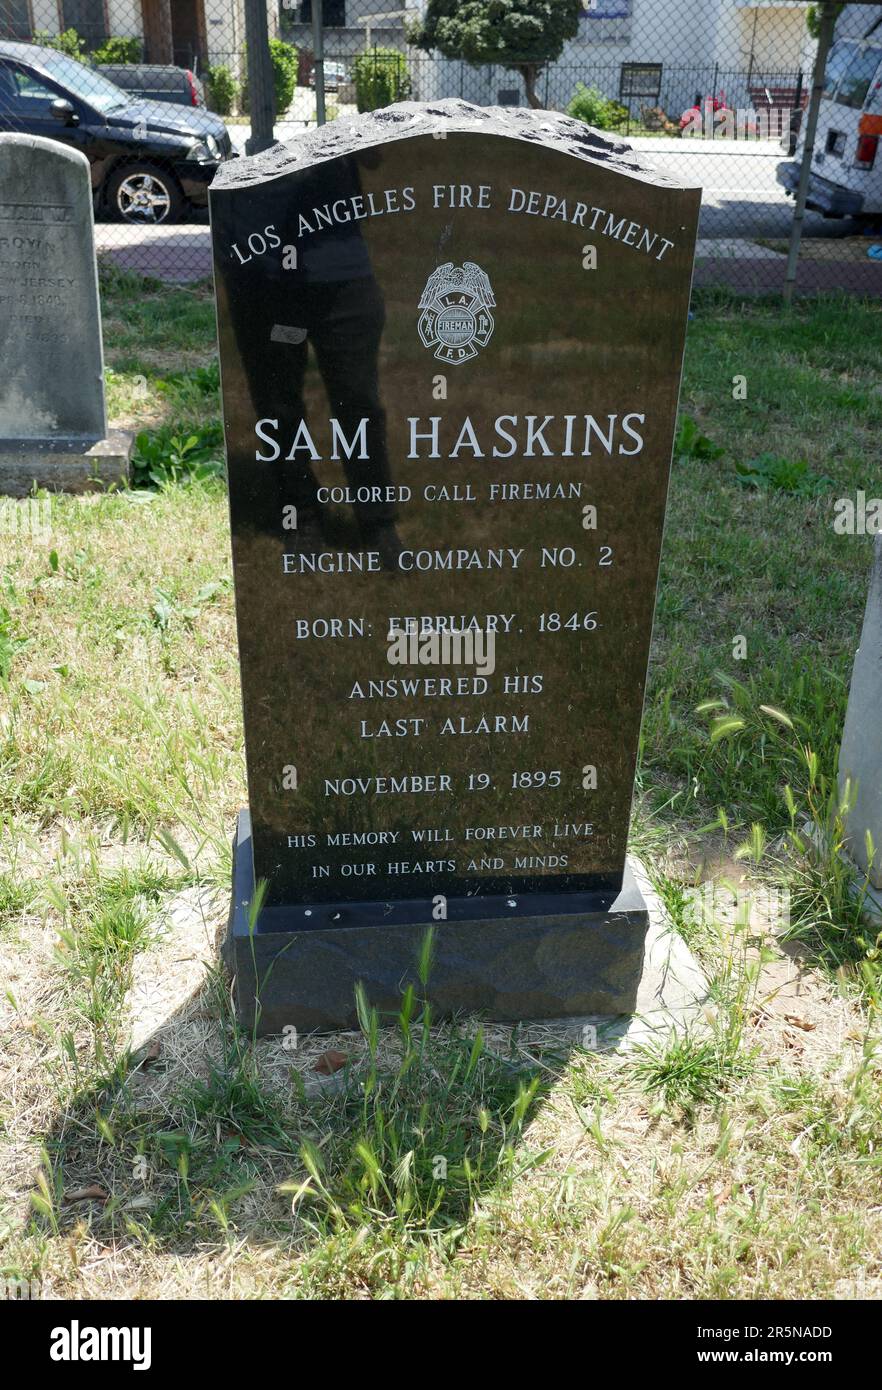 Los Angeles, California, USA 3rd June 2023 Firefighter Sam Haskins Grave at Evergreen Cemetery at 204 N. Evergreen Avenue on June 3, 2023 in Los Angeles, California, USA. Photo by Barry King/Alamy Stock Photo Stock Photo